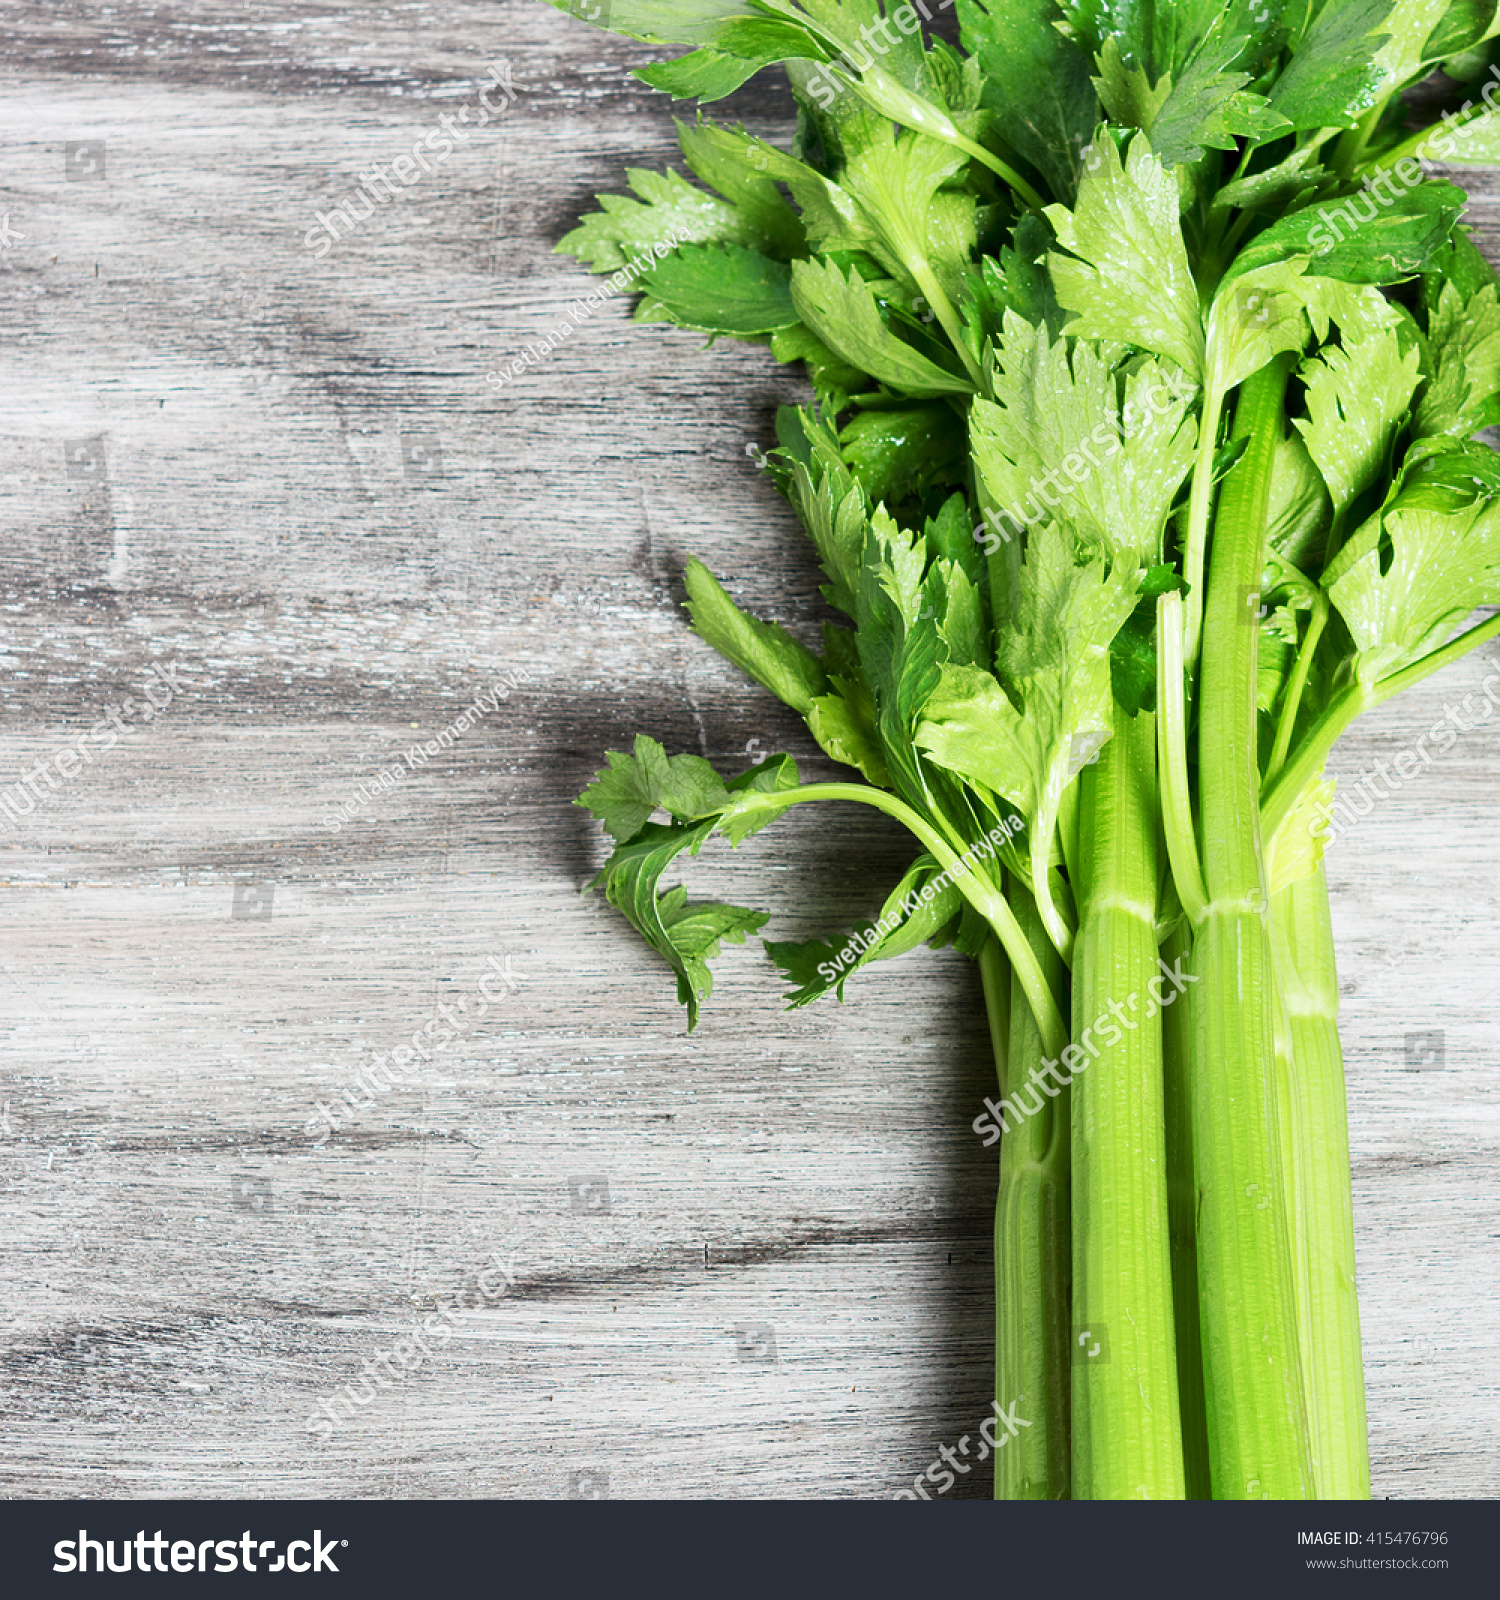 aim Draw a picture Slippery Stem Celery On Grey Wooden Table Stock Photo 415476796 | Shutterstock